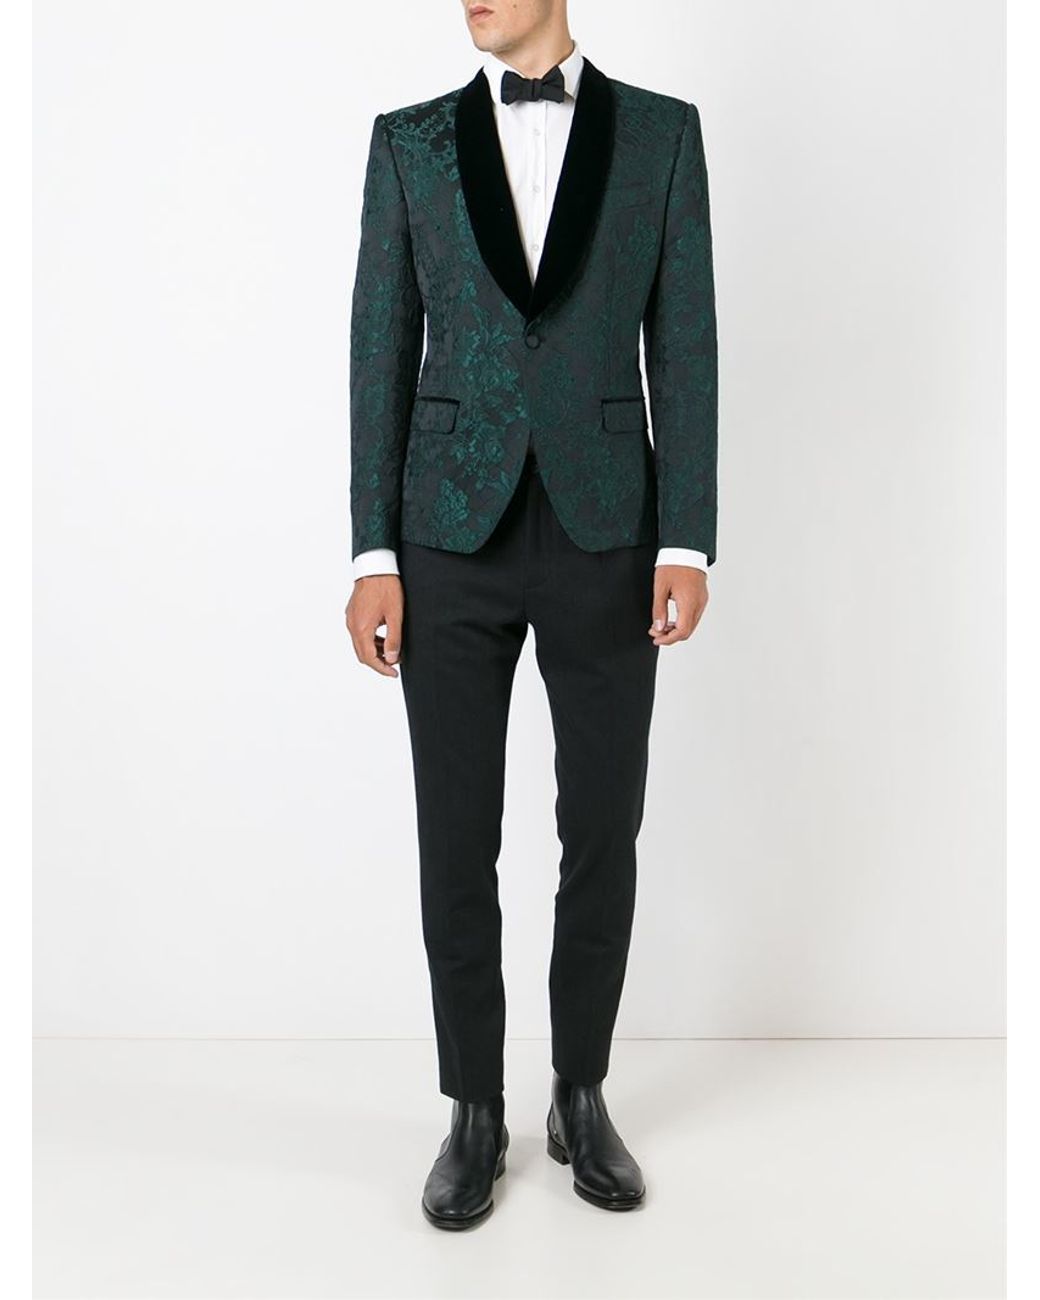 Dolce & Gabbana Embroidered Floral Lace Tuxedo Jacket in Black for Men ...